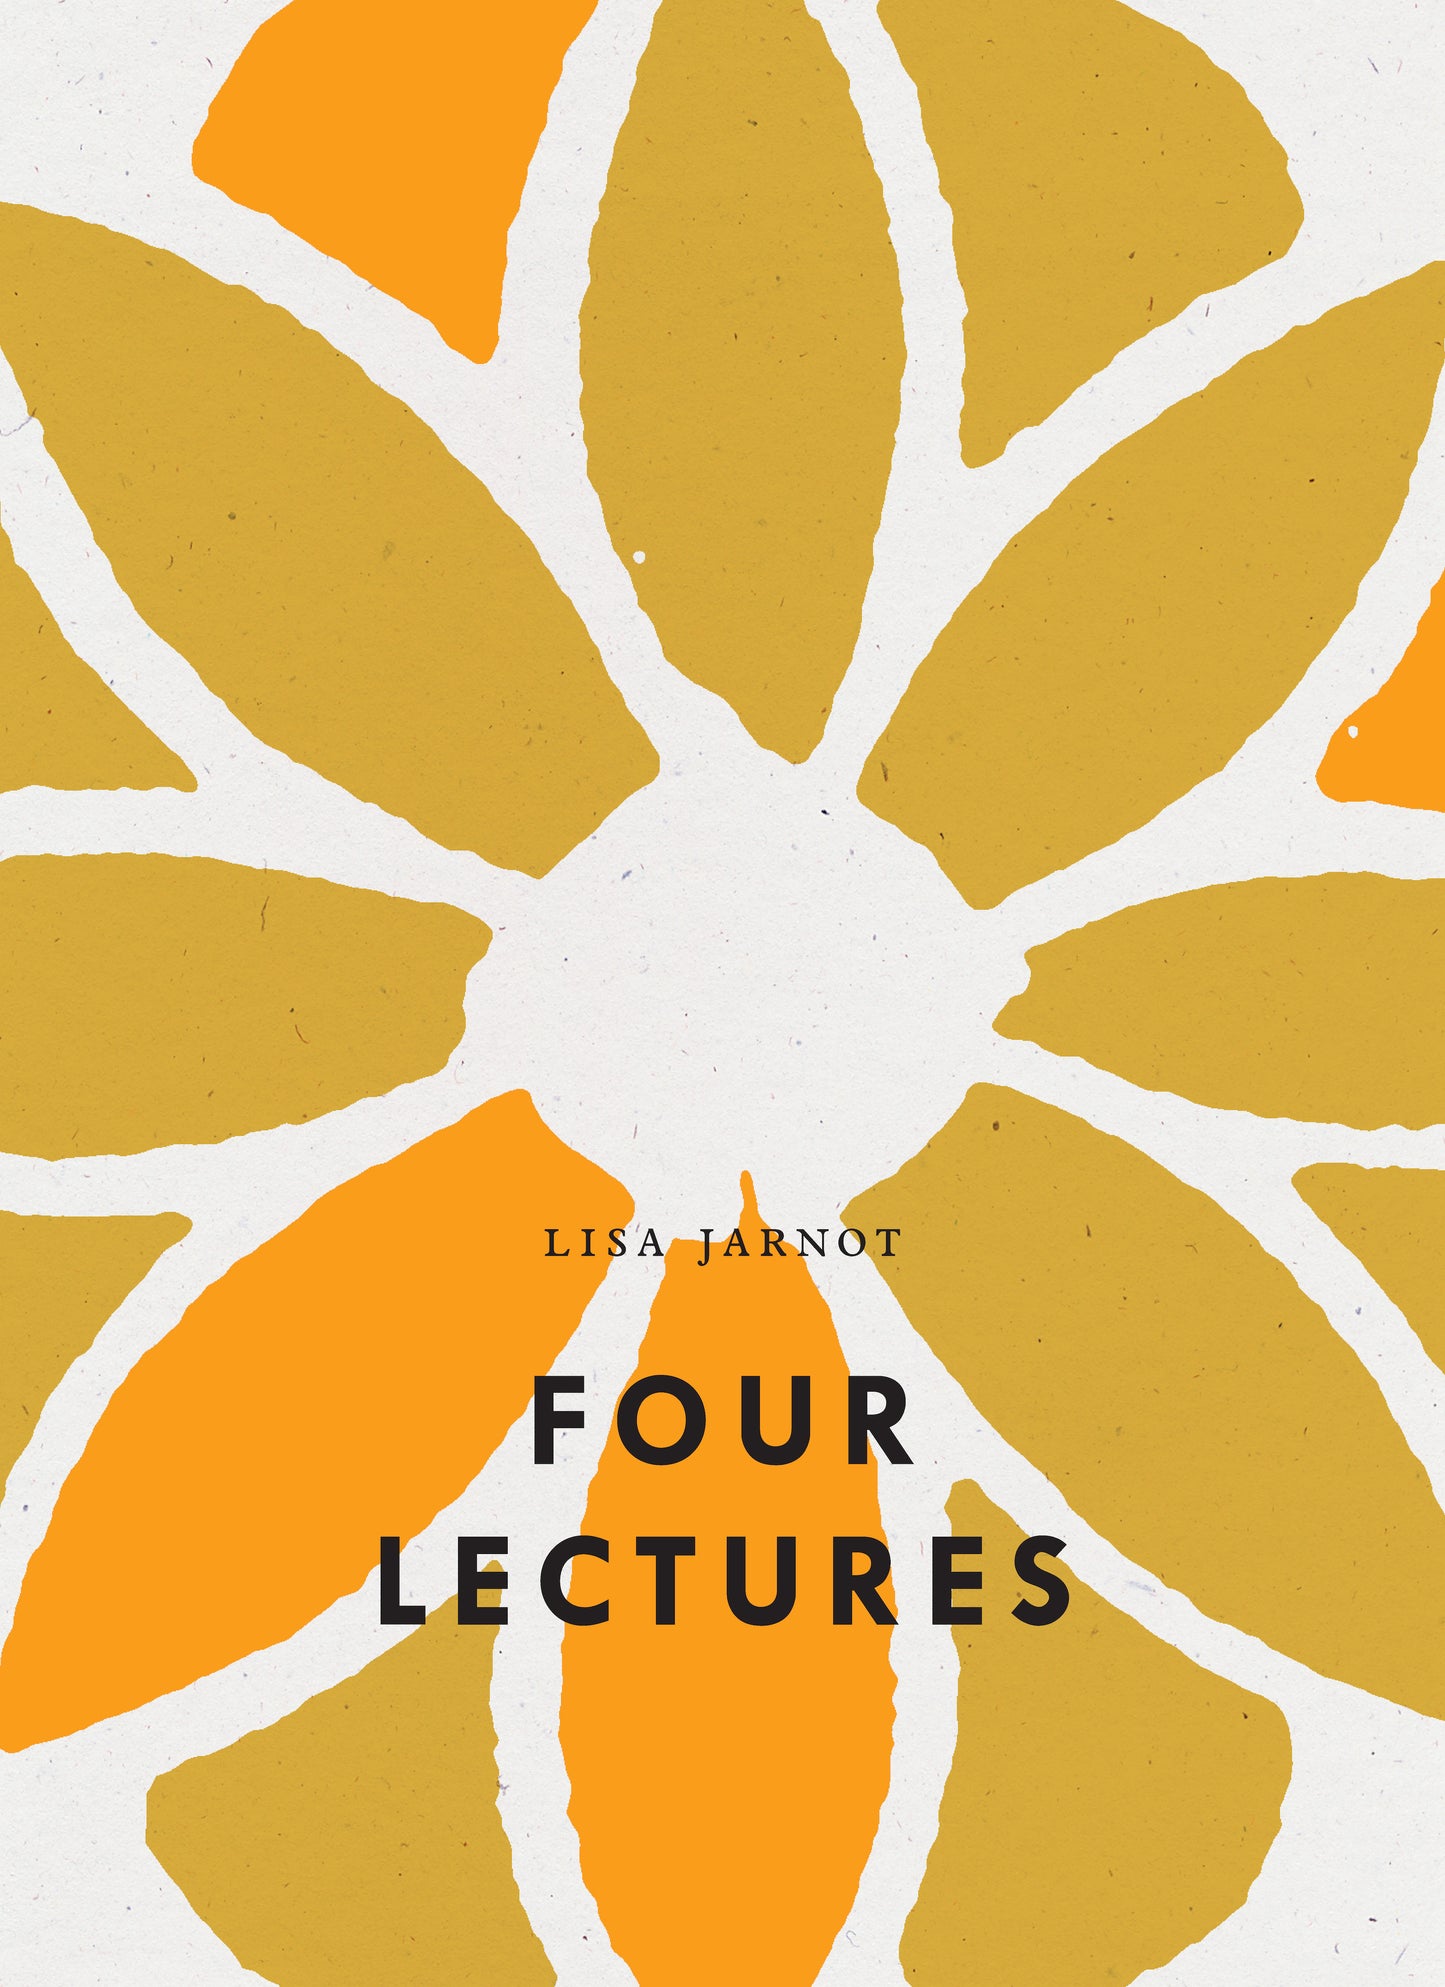 Four Lectures